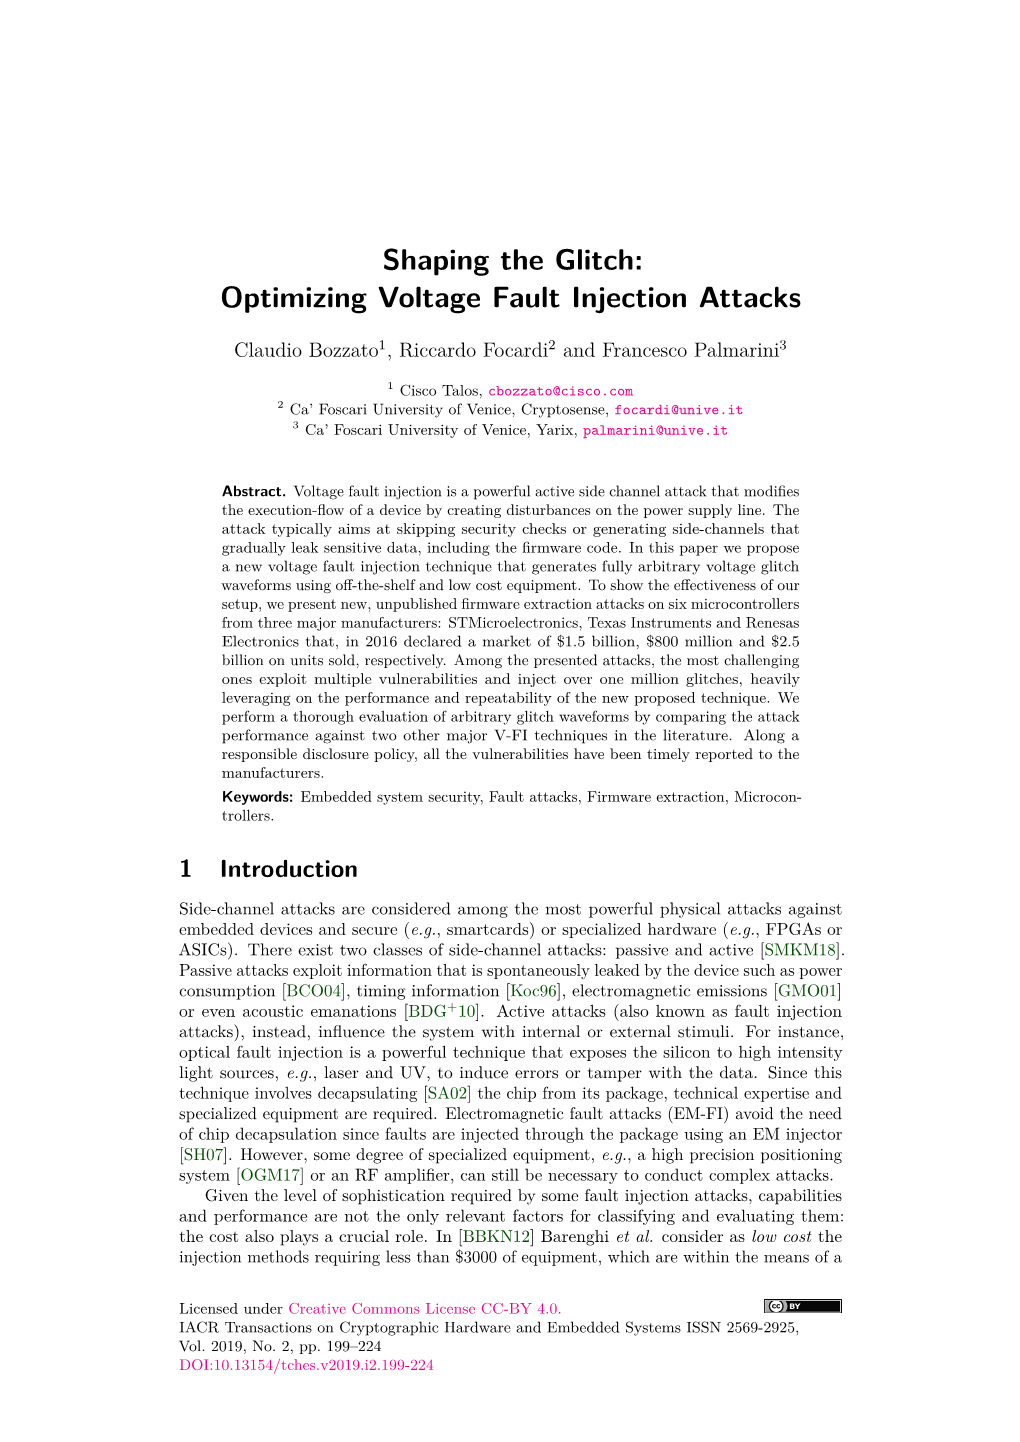 Shaping the Glitch: Optimizing Voltage Fault Injection Attacks